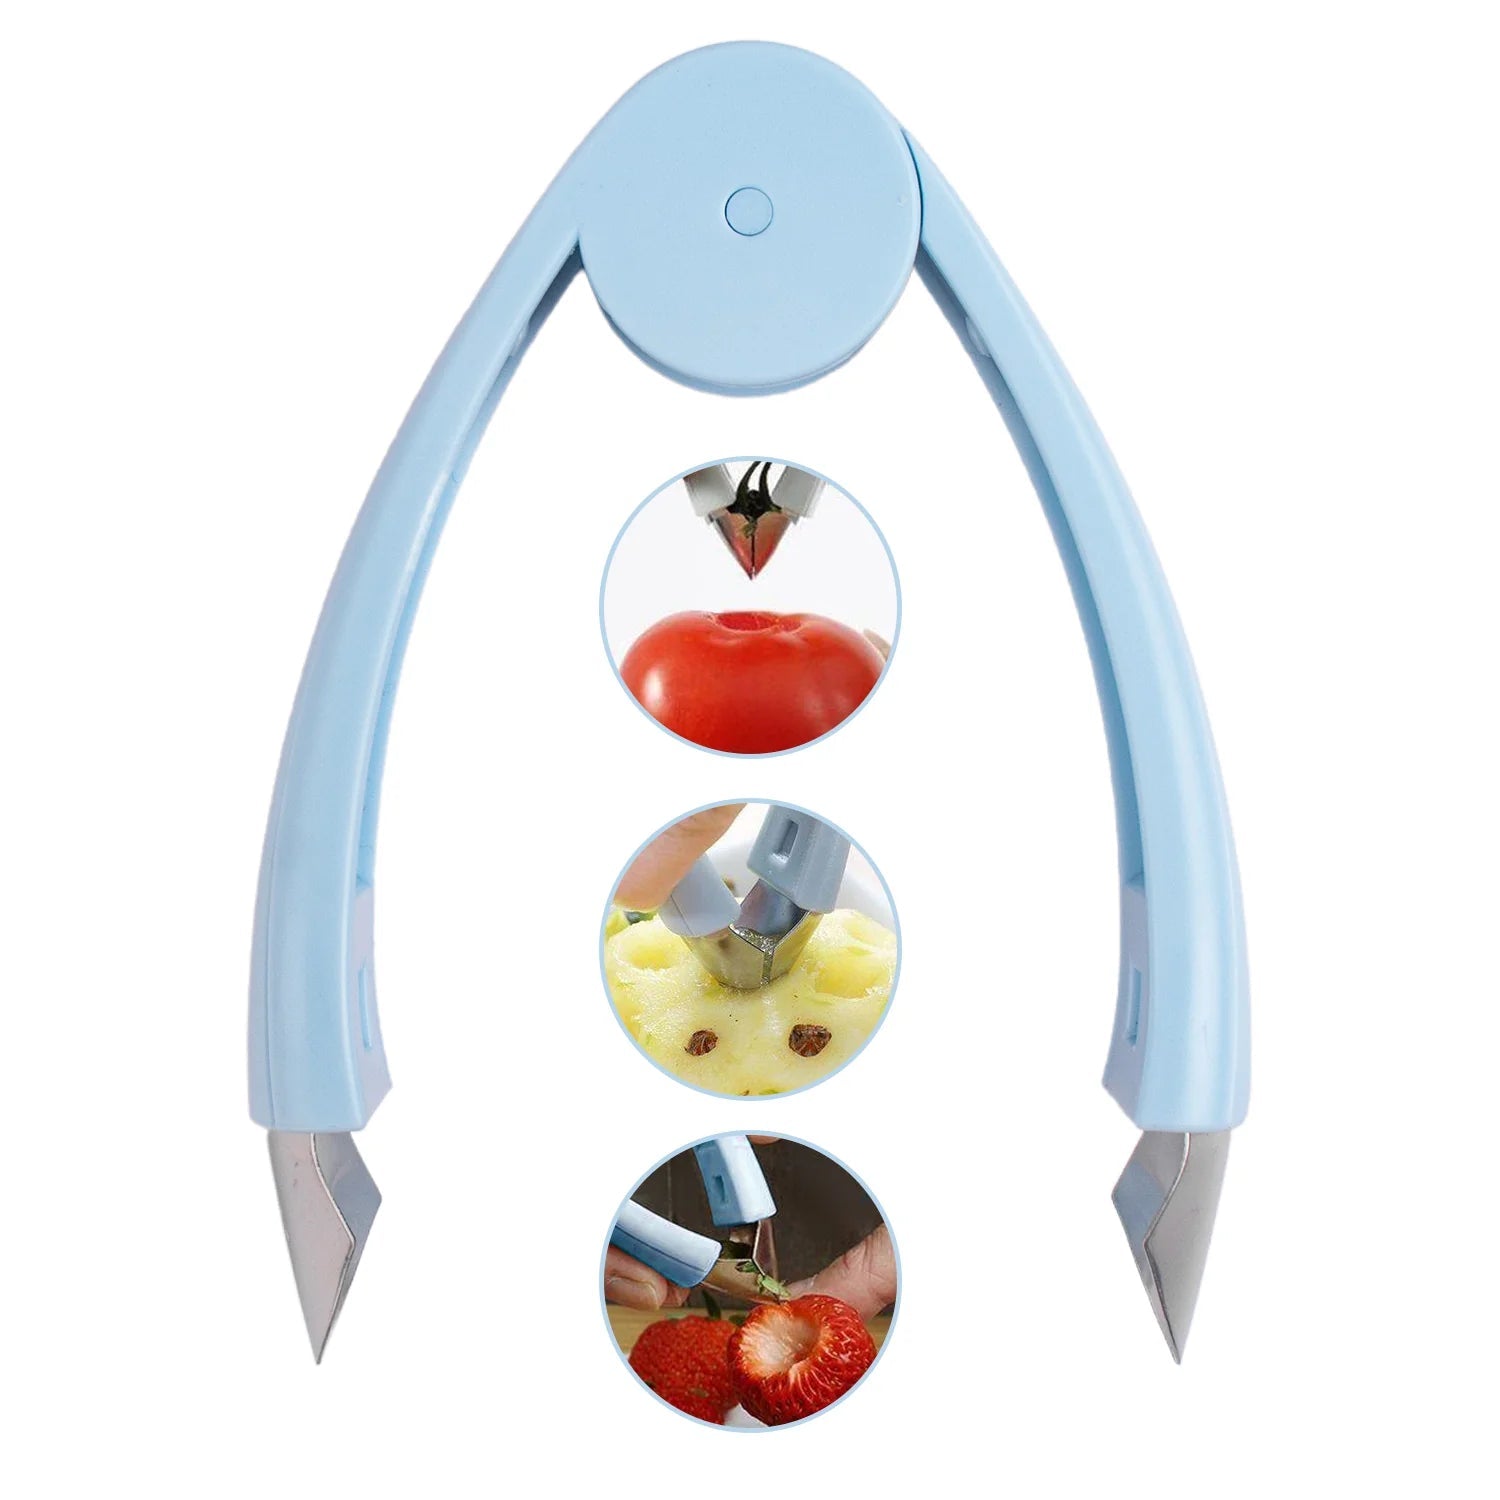 Stainless Steel Electric Vegetable Corer Portable Tool Removal